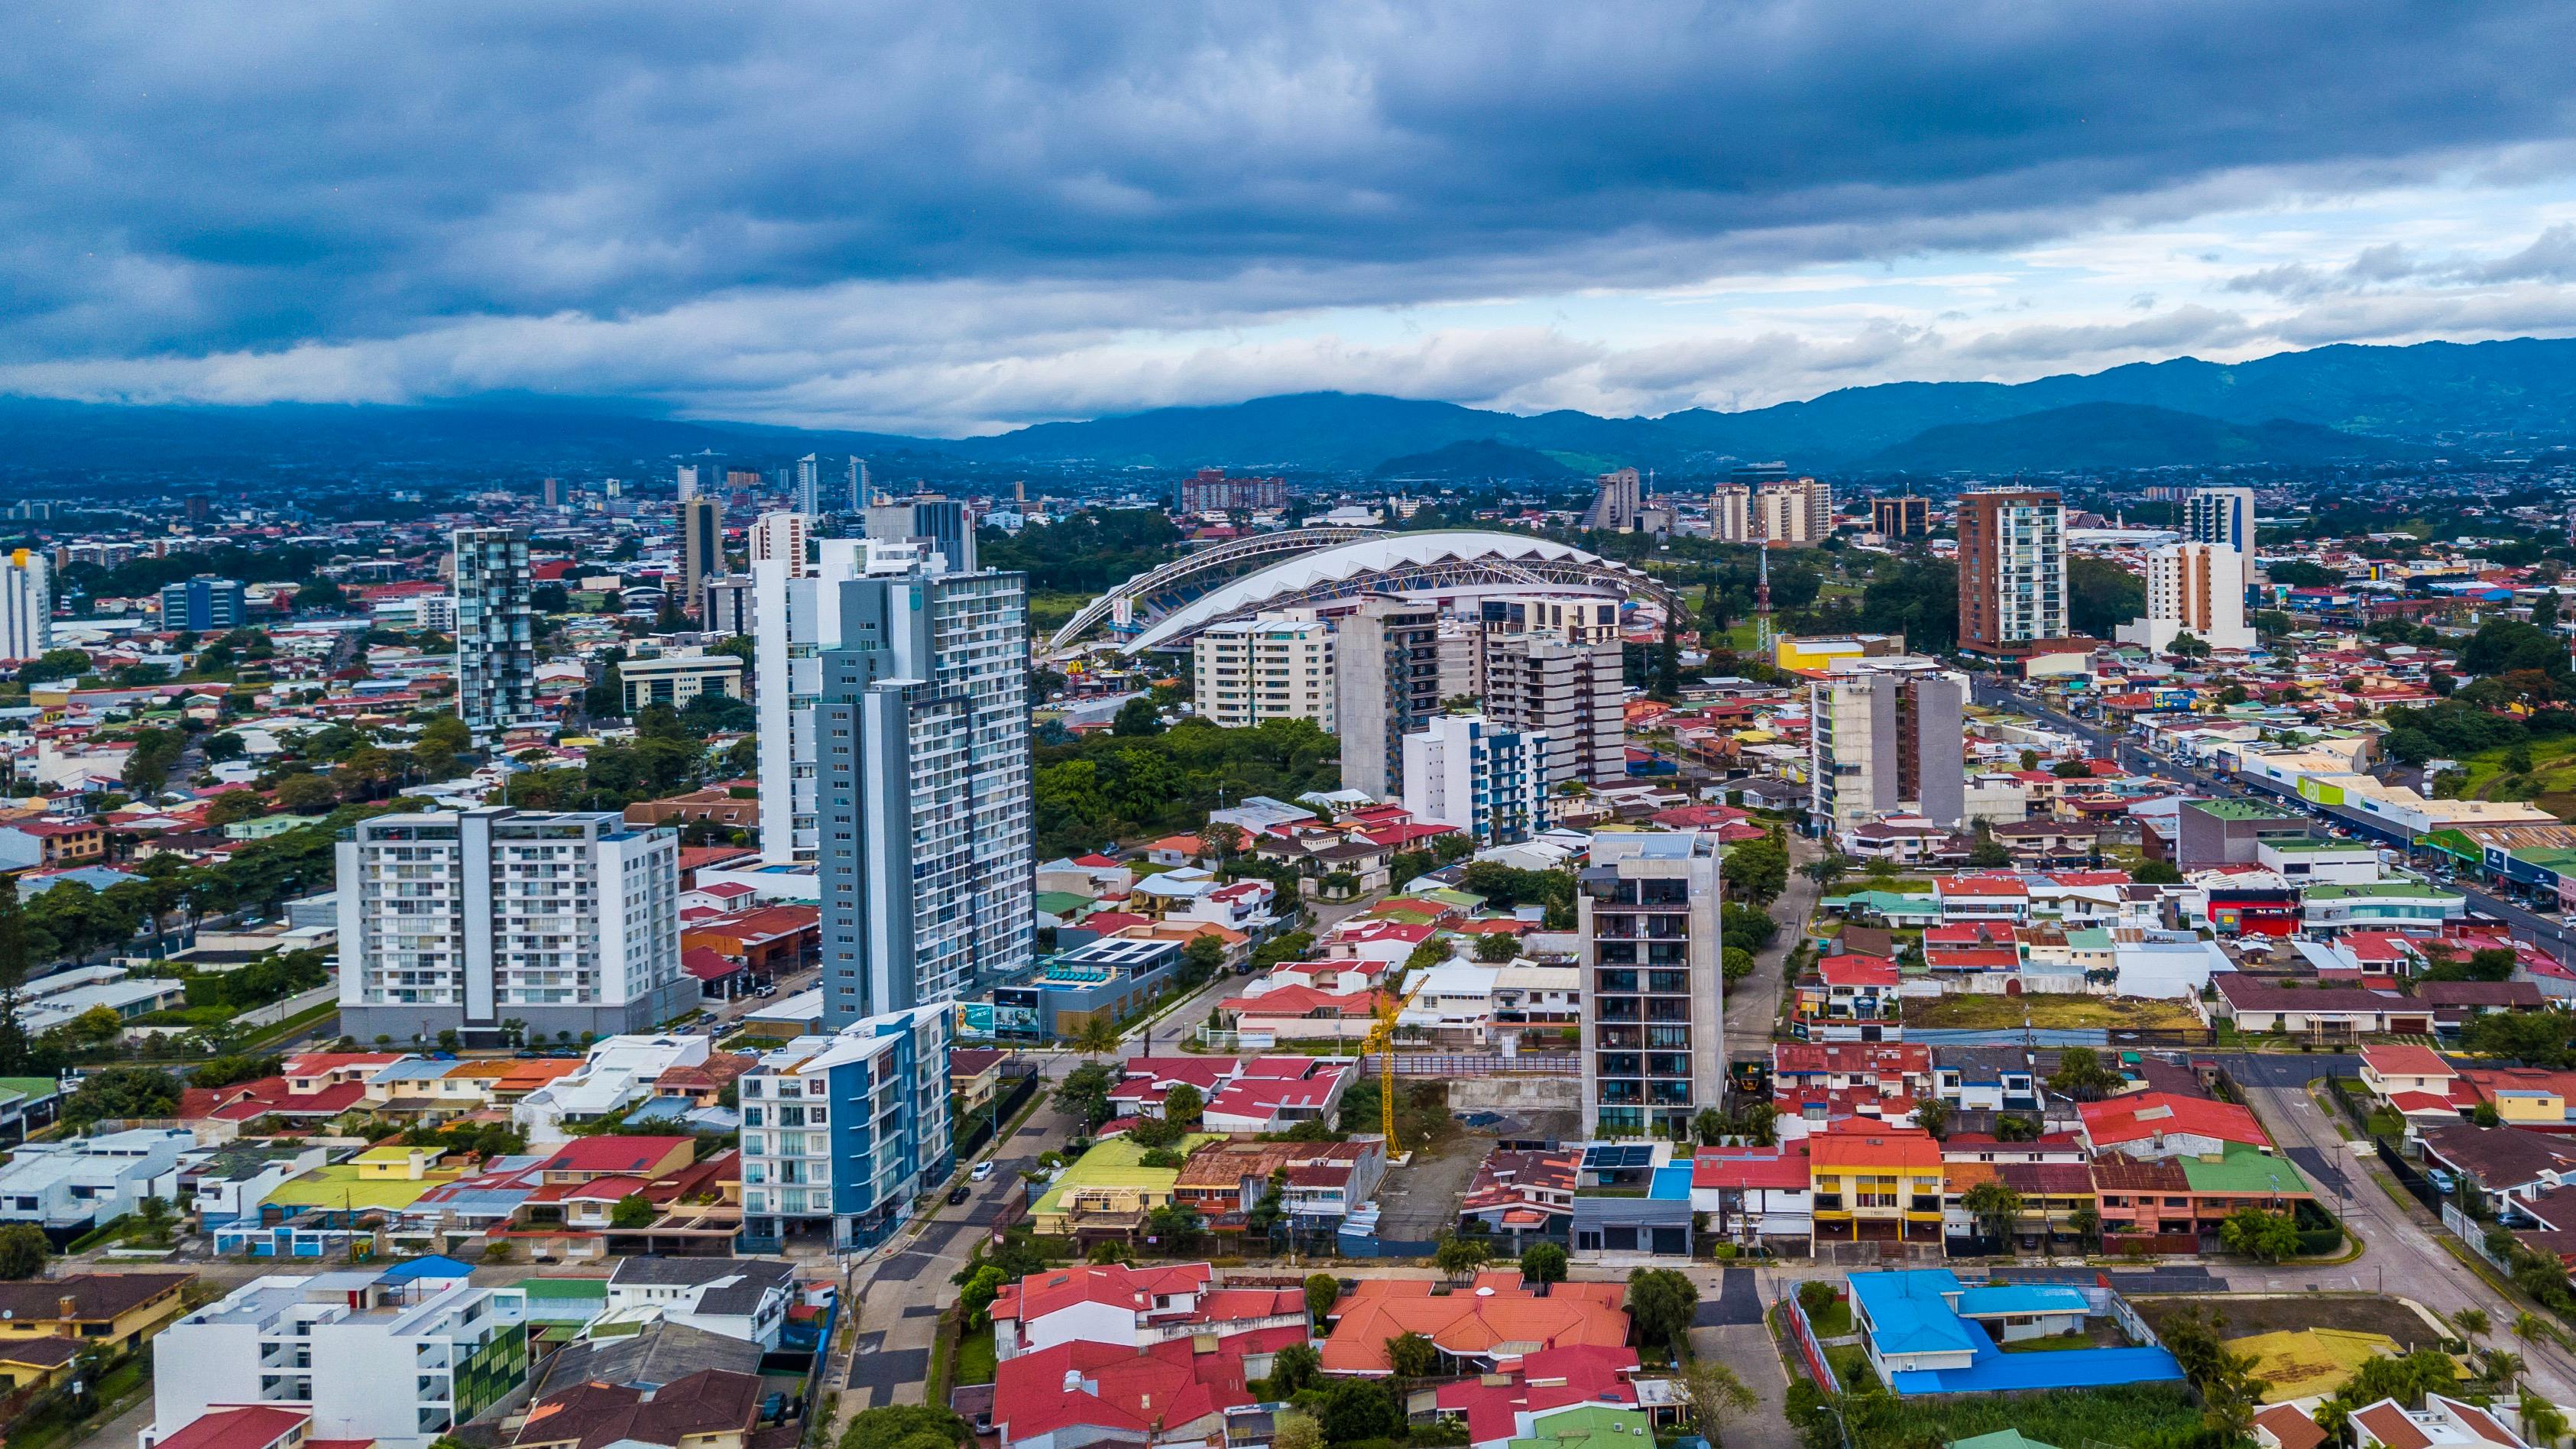 ahmed mahmed share pictures of san jose costa rica photos